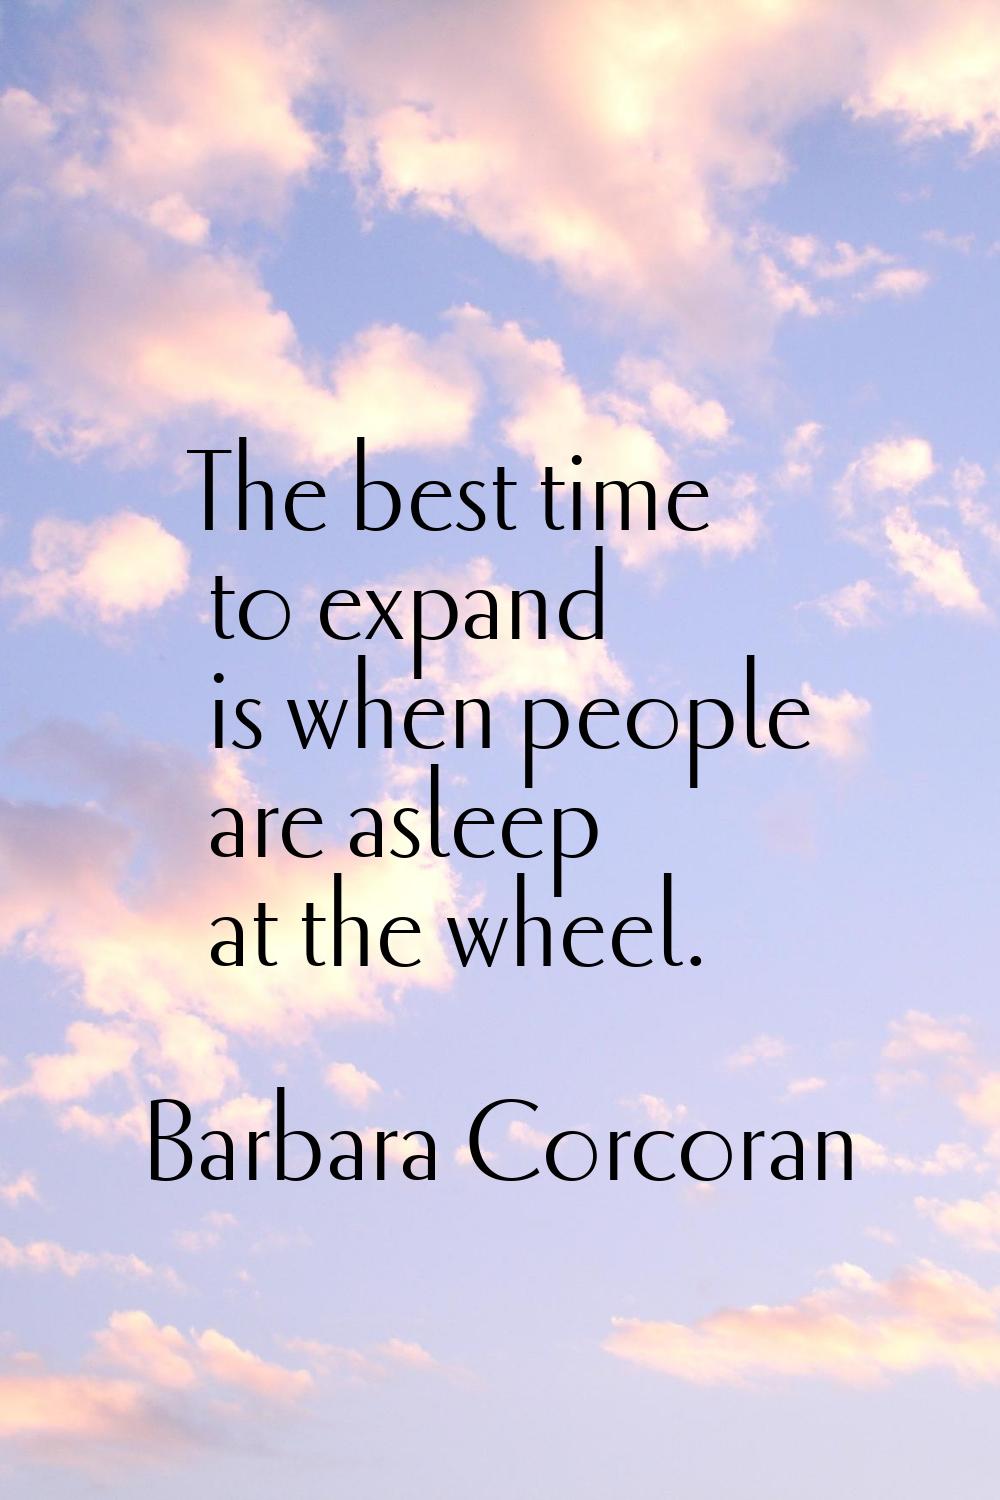 The best time to expand is when people are asleep at the wheel.